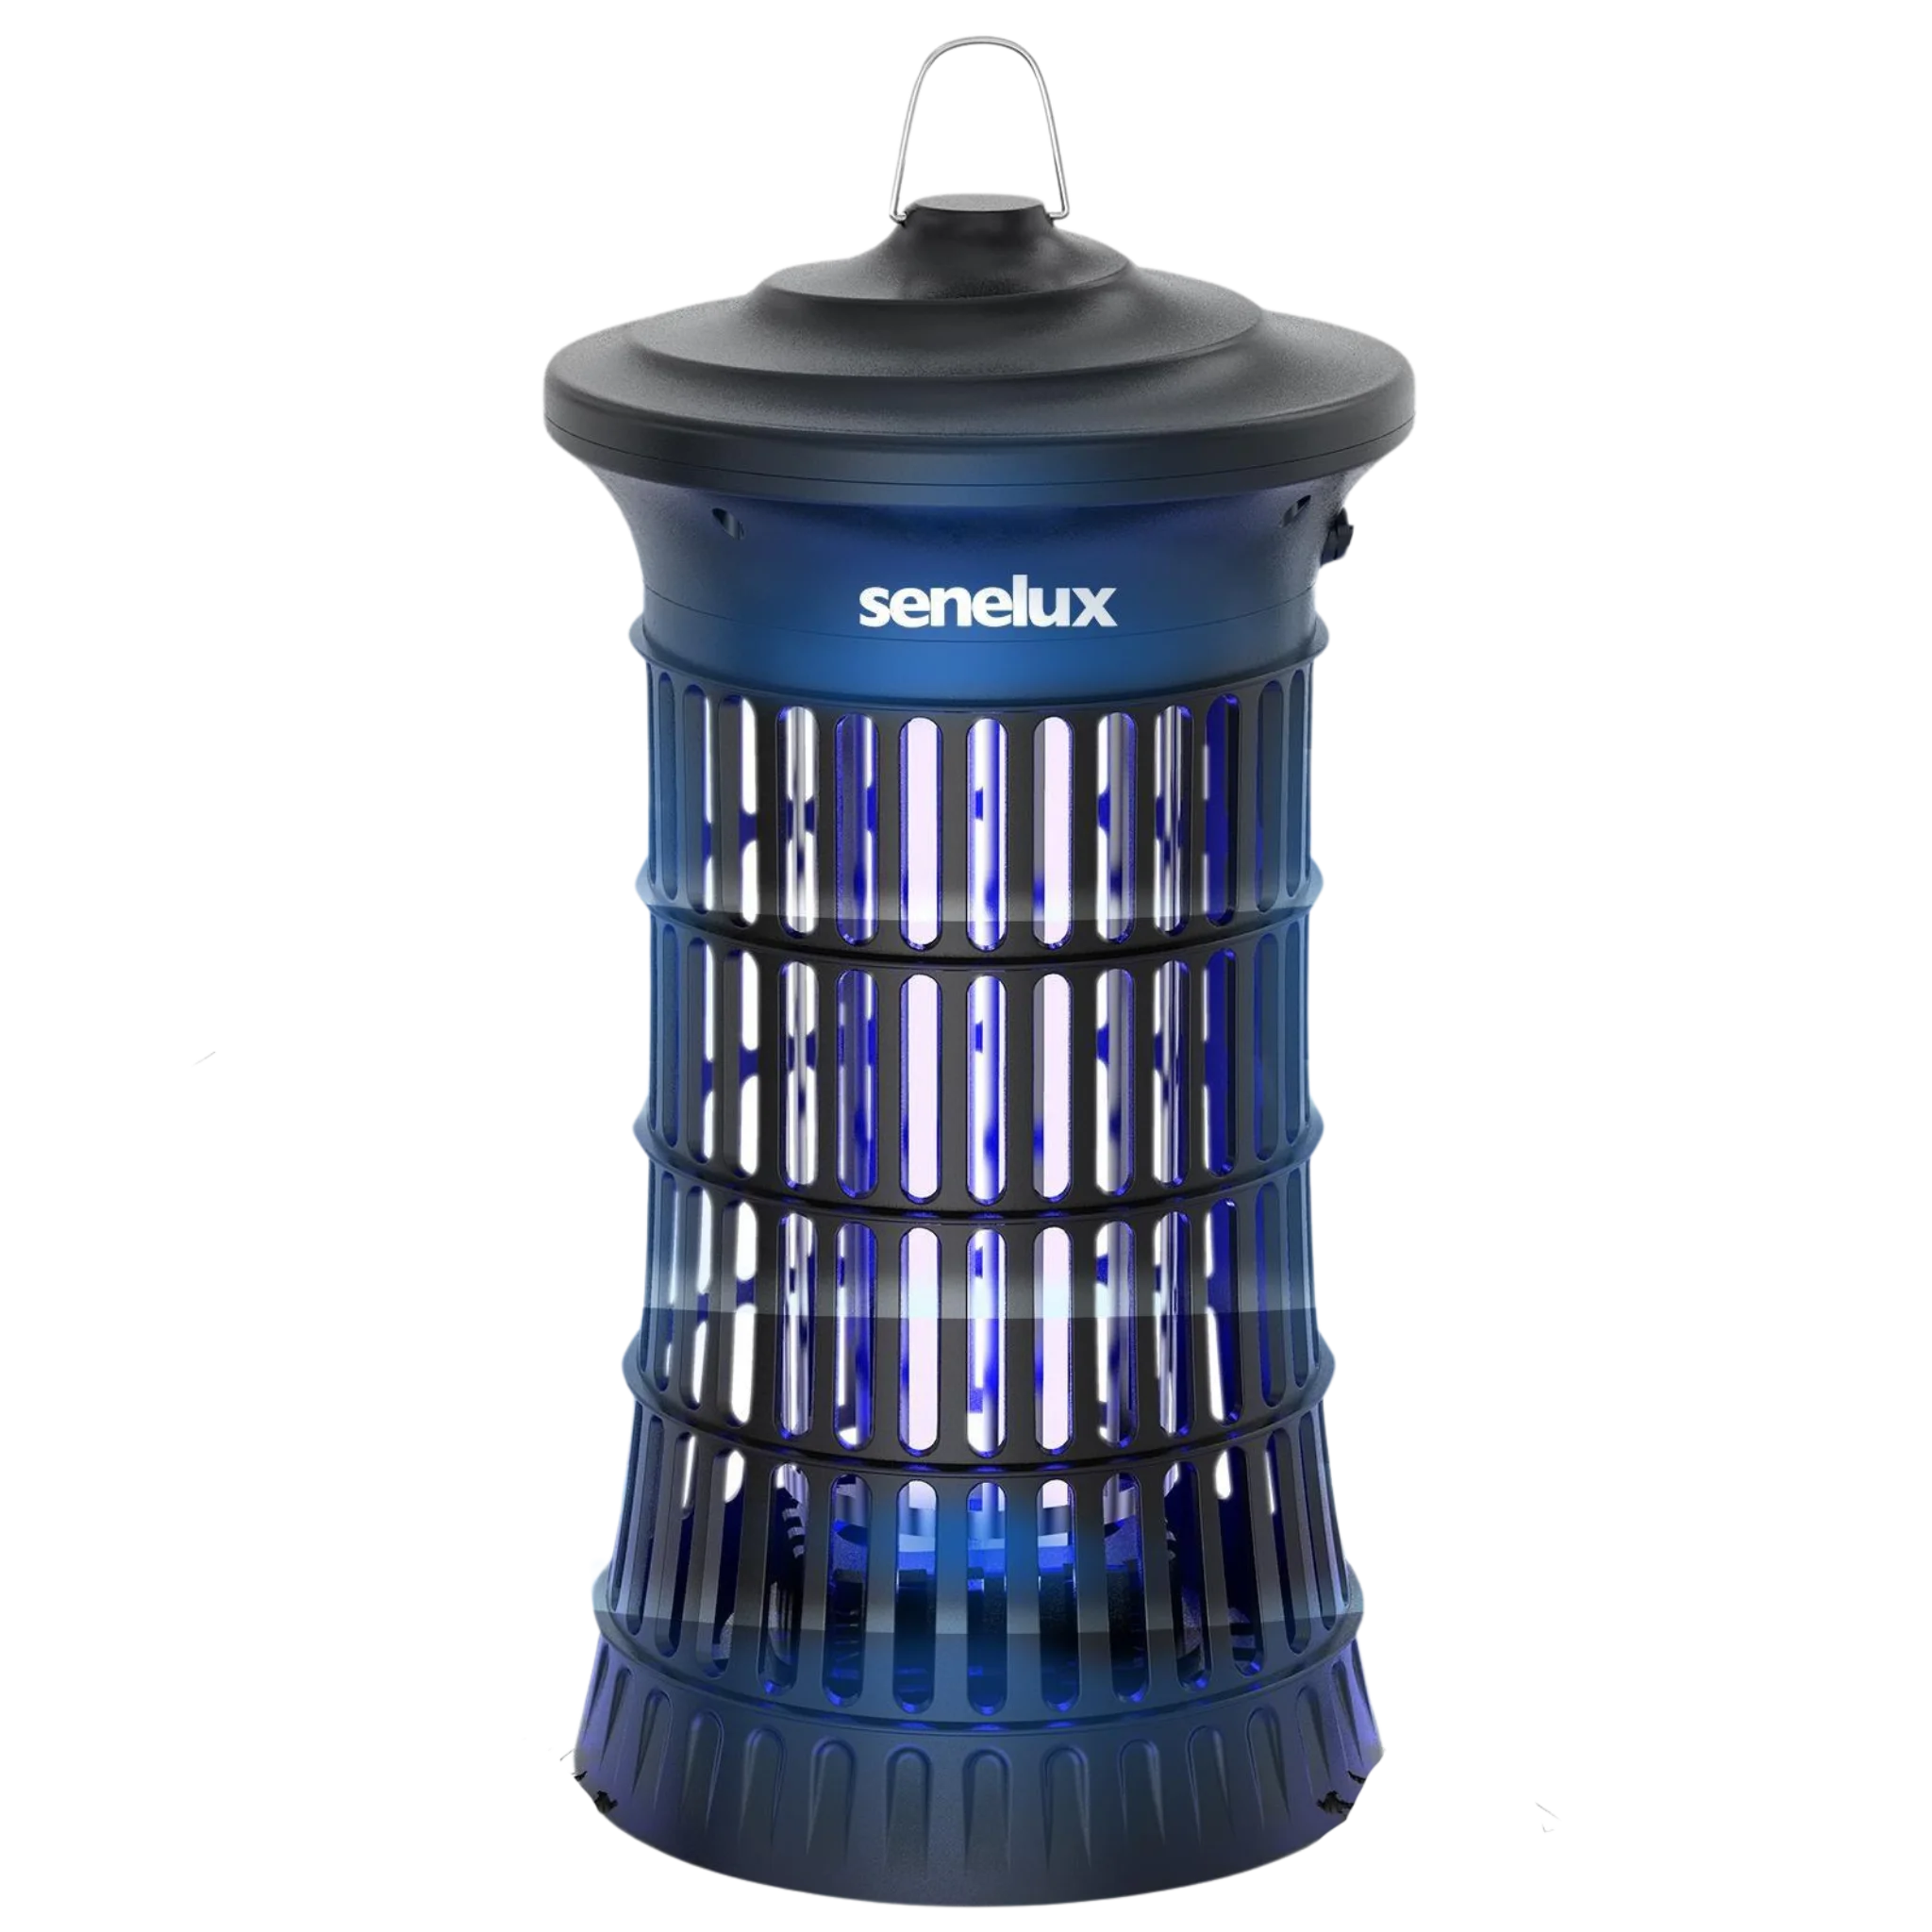 The Senelux 4500v Bug Zapper Lamp glowing with a purple light with the zap rod safely blocked behind a cage